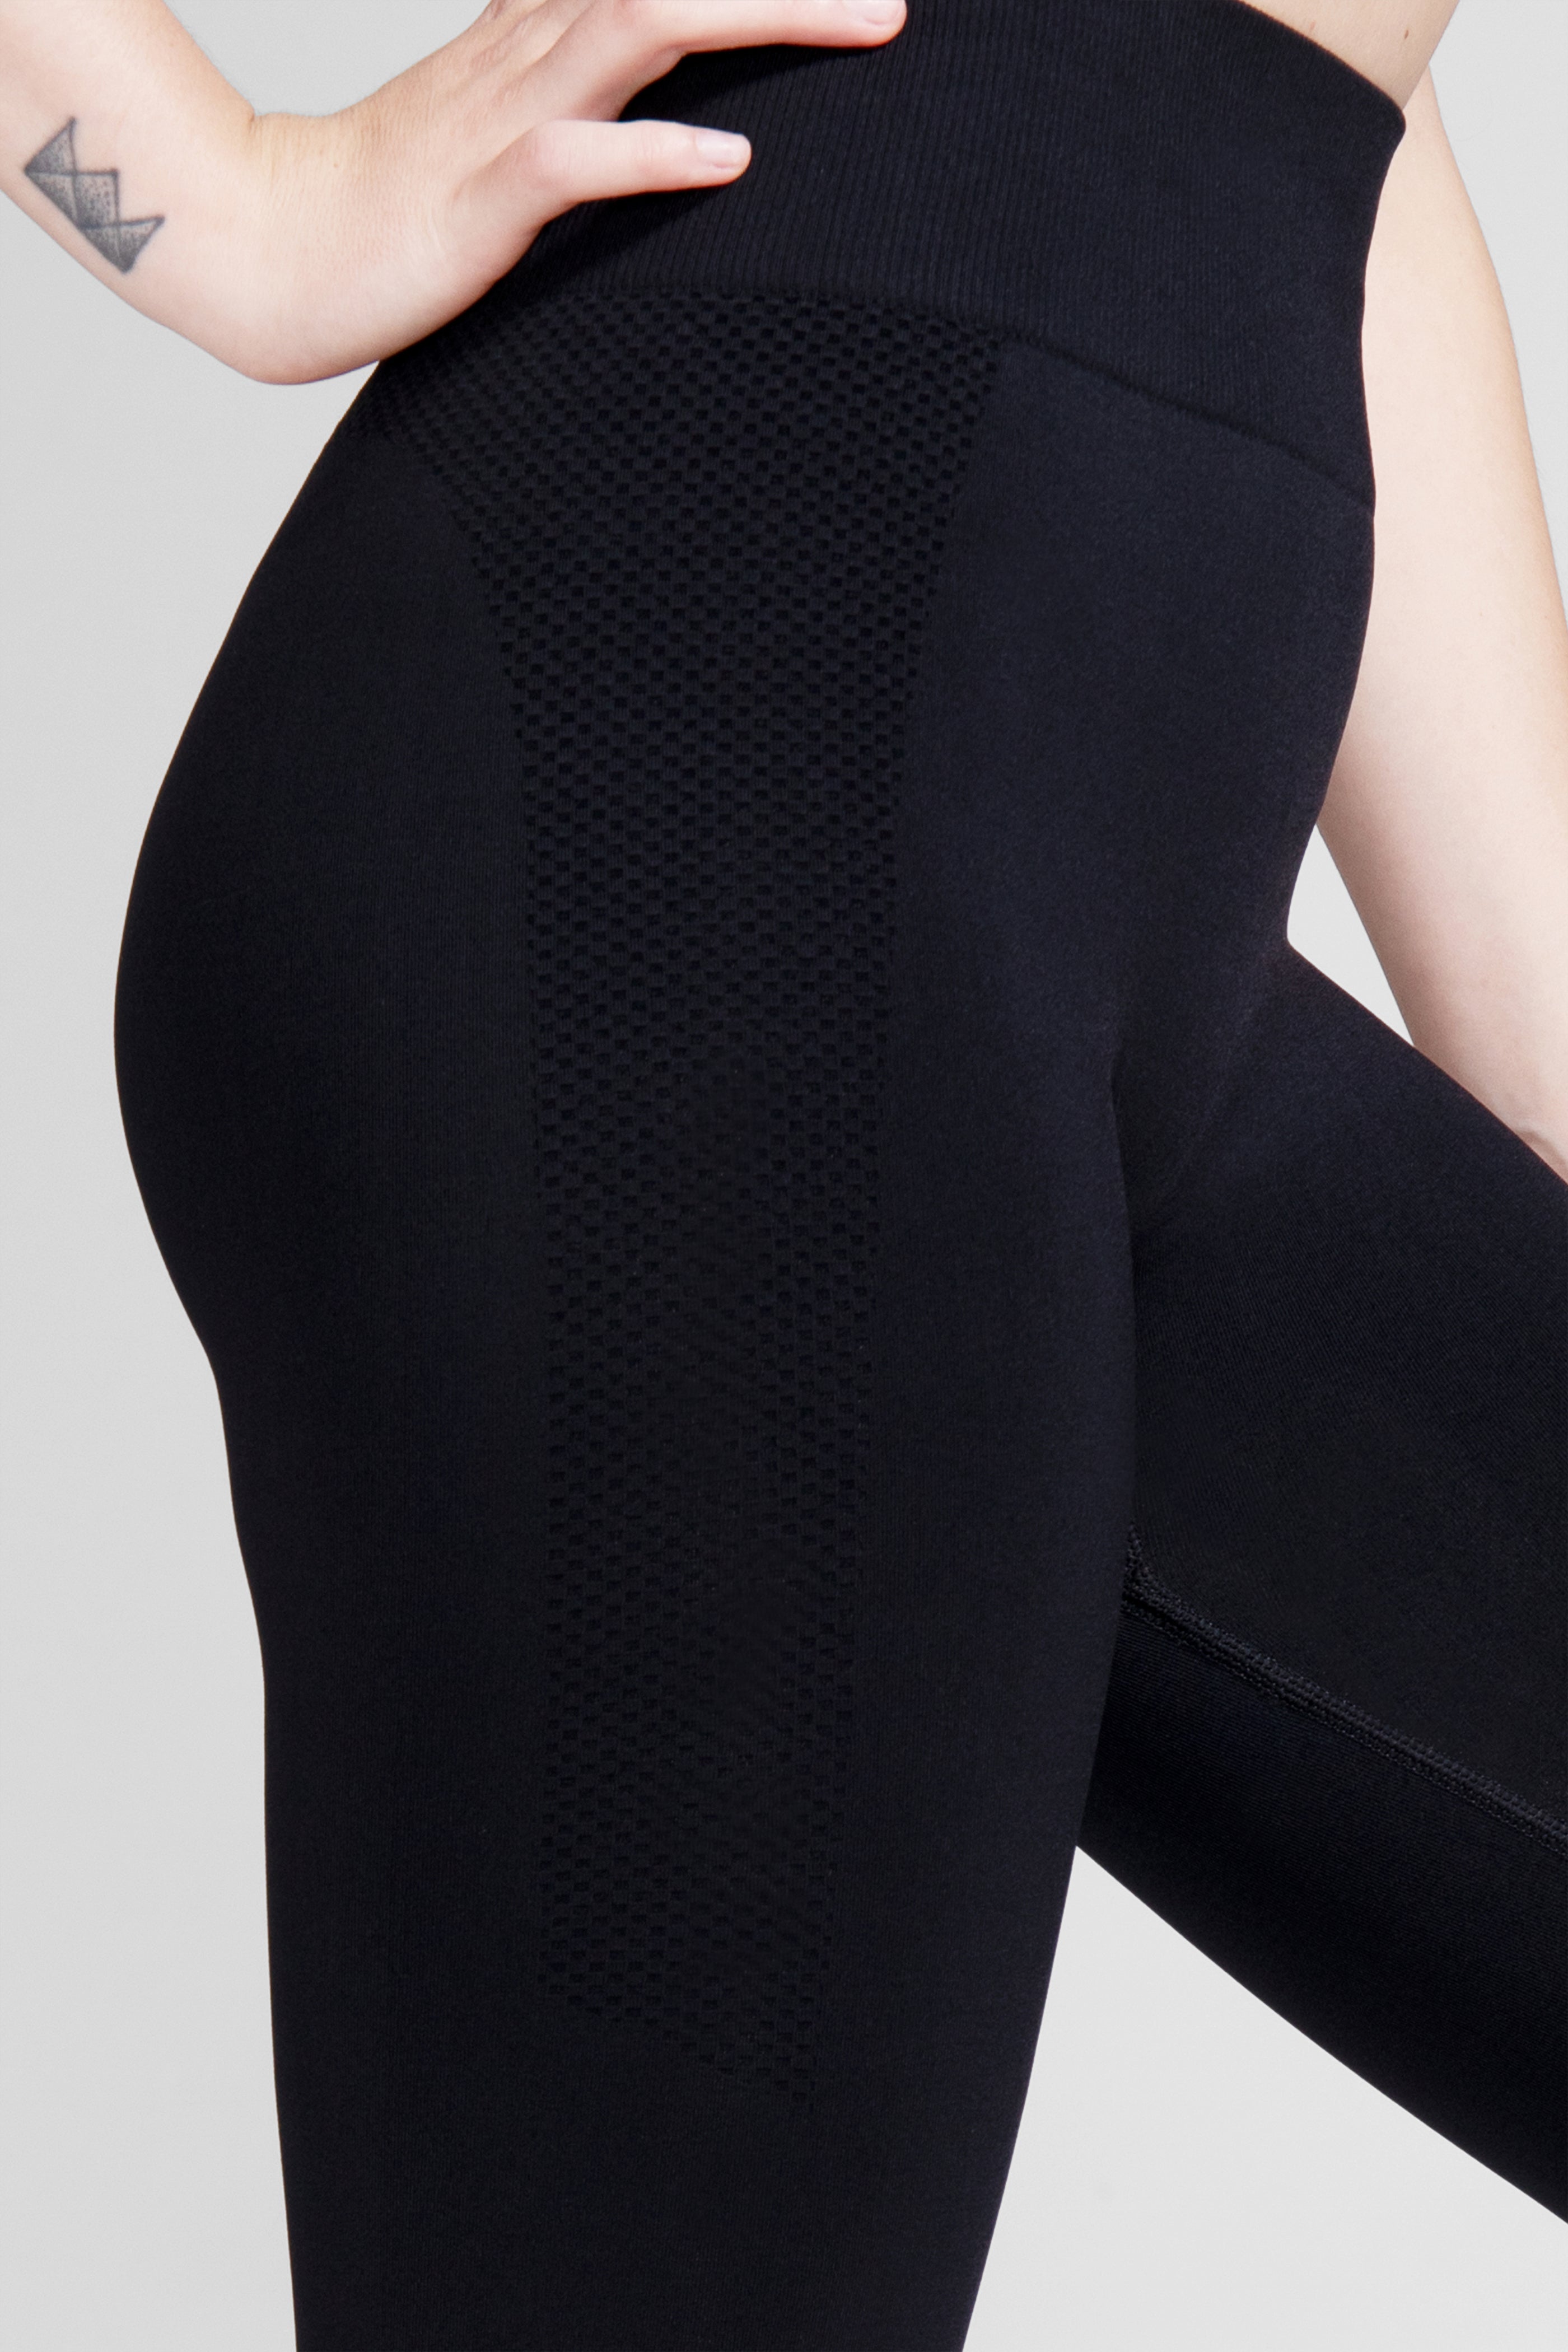 Skinny Sexy Leg|high Waist Spandex Leggings For Women - Sexy Skinny Workout  Tights